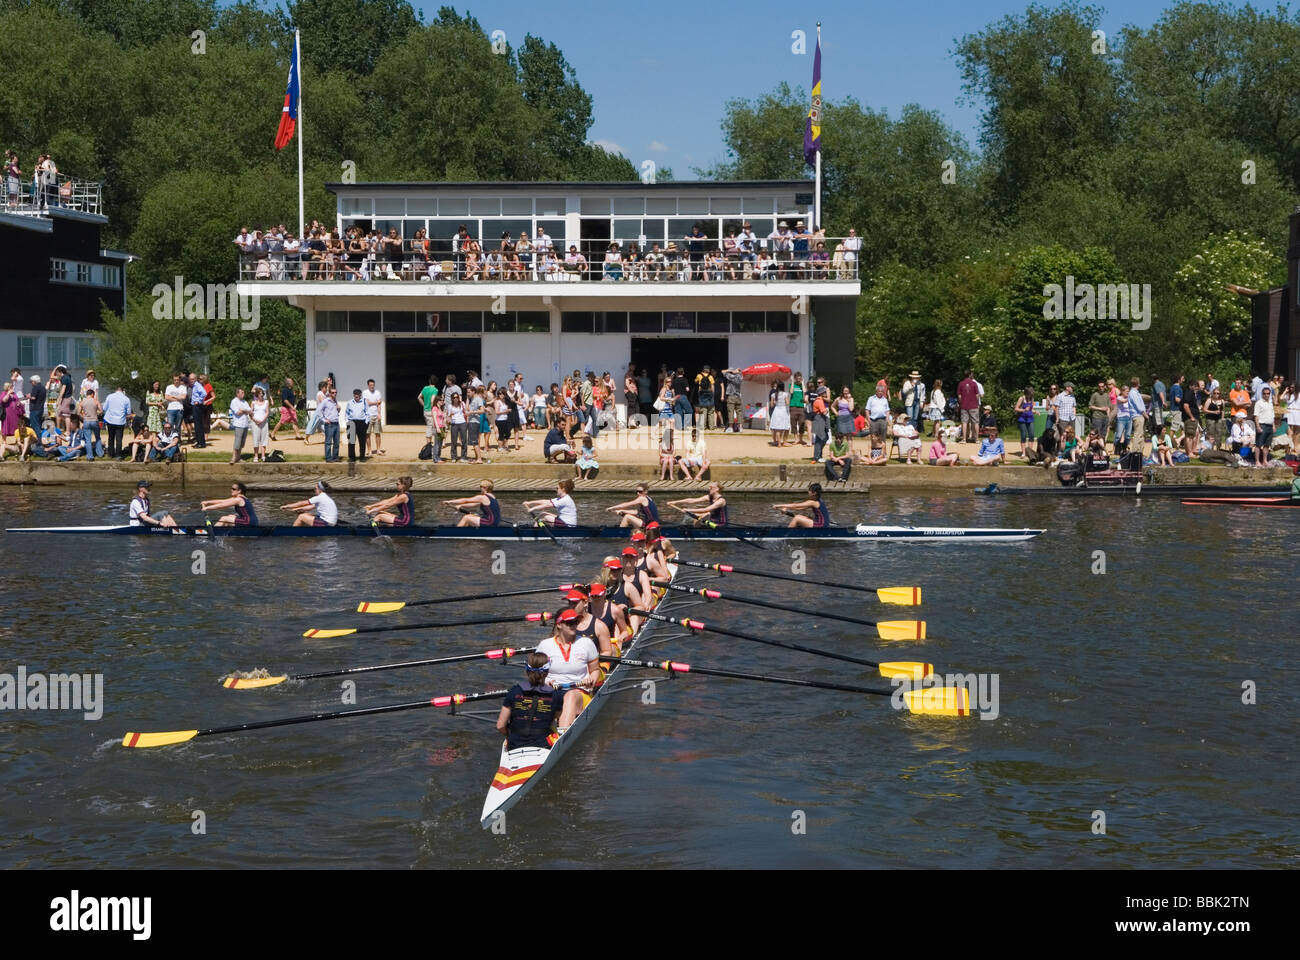 Oxford University Rowing Clubs Eights Week la club house canottaggio Gare sul fiume Isis attualmente fiume Tamigi Oxfordshire 2009 HOMER SYKES 2000 Foto Stock